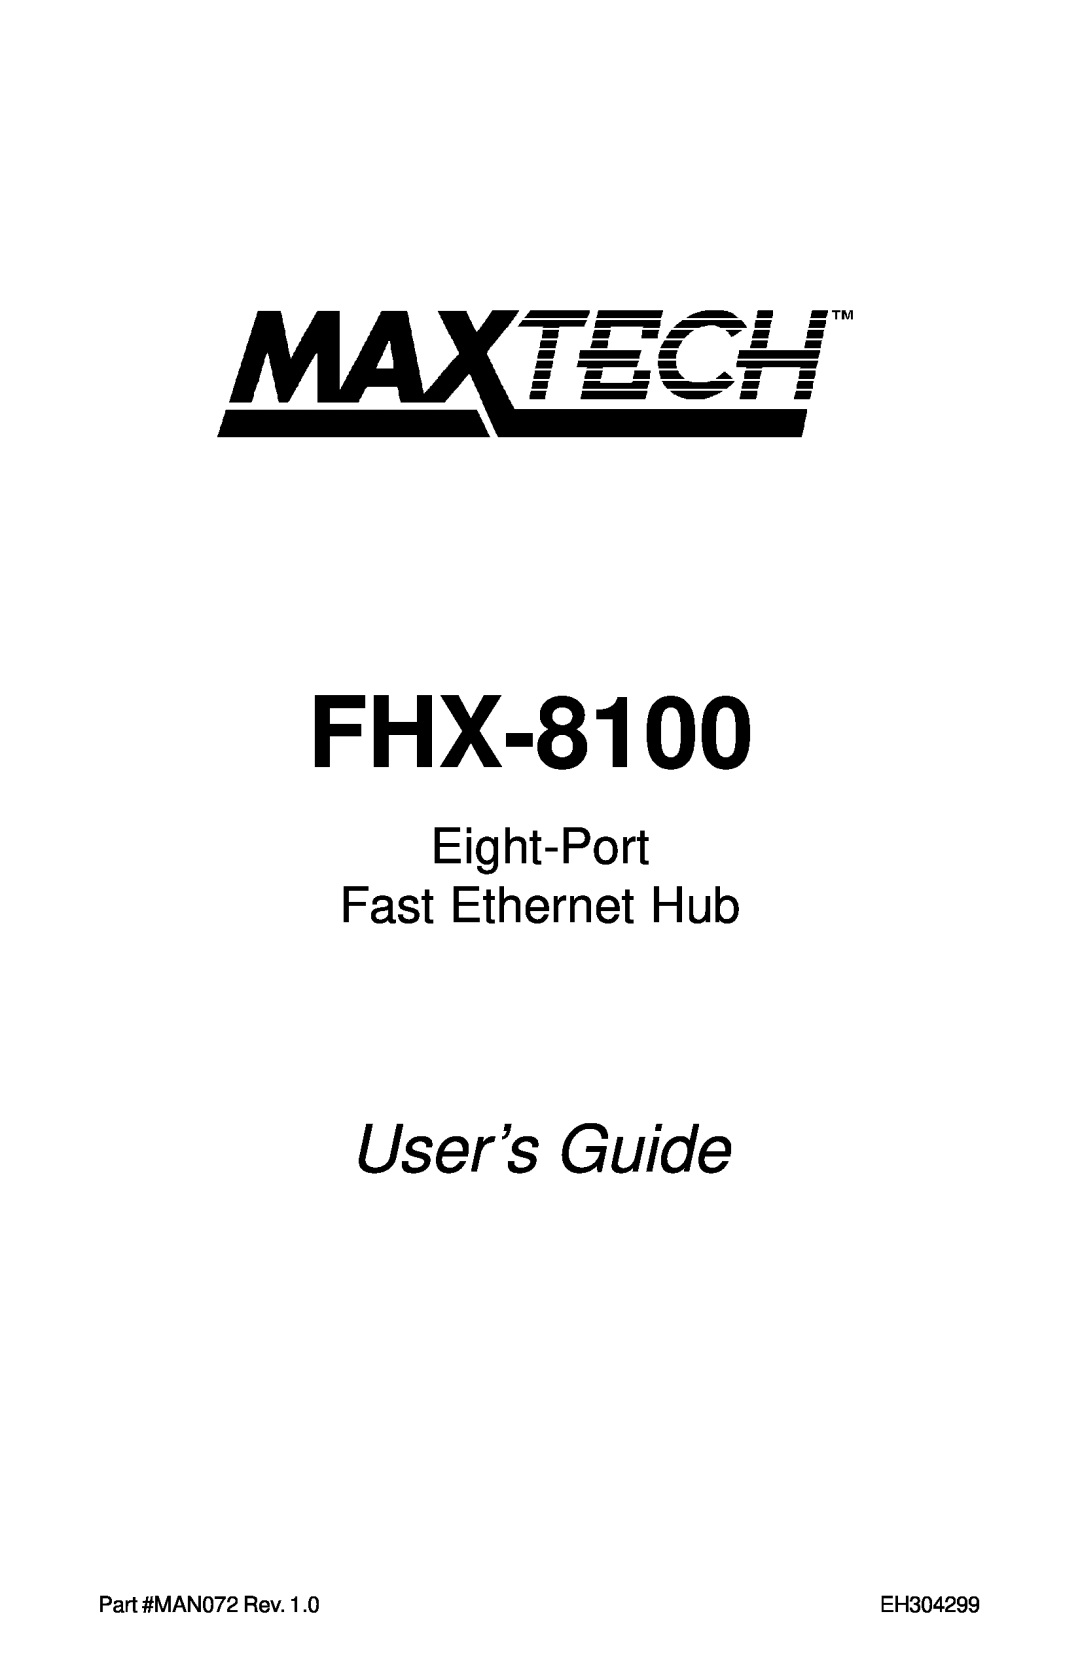 MaxTech FHX-8100 manual User’s Guide, Eight-Port Fast Ethernet Hub, MAN072 Rev, EH304299 